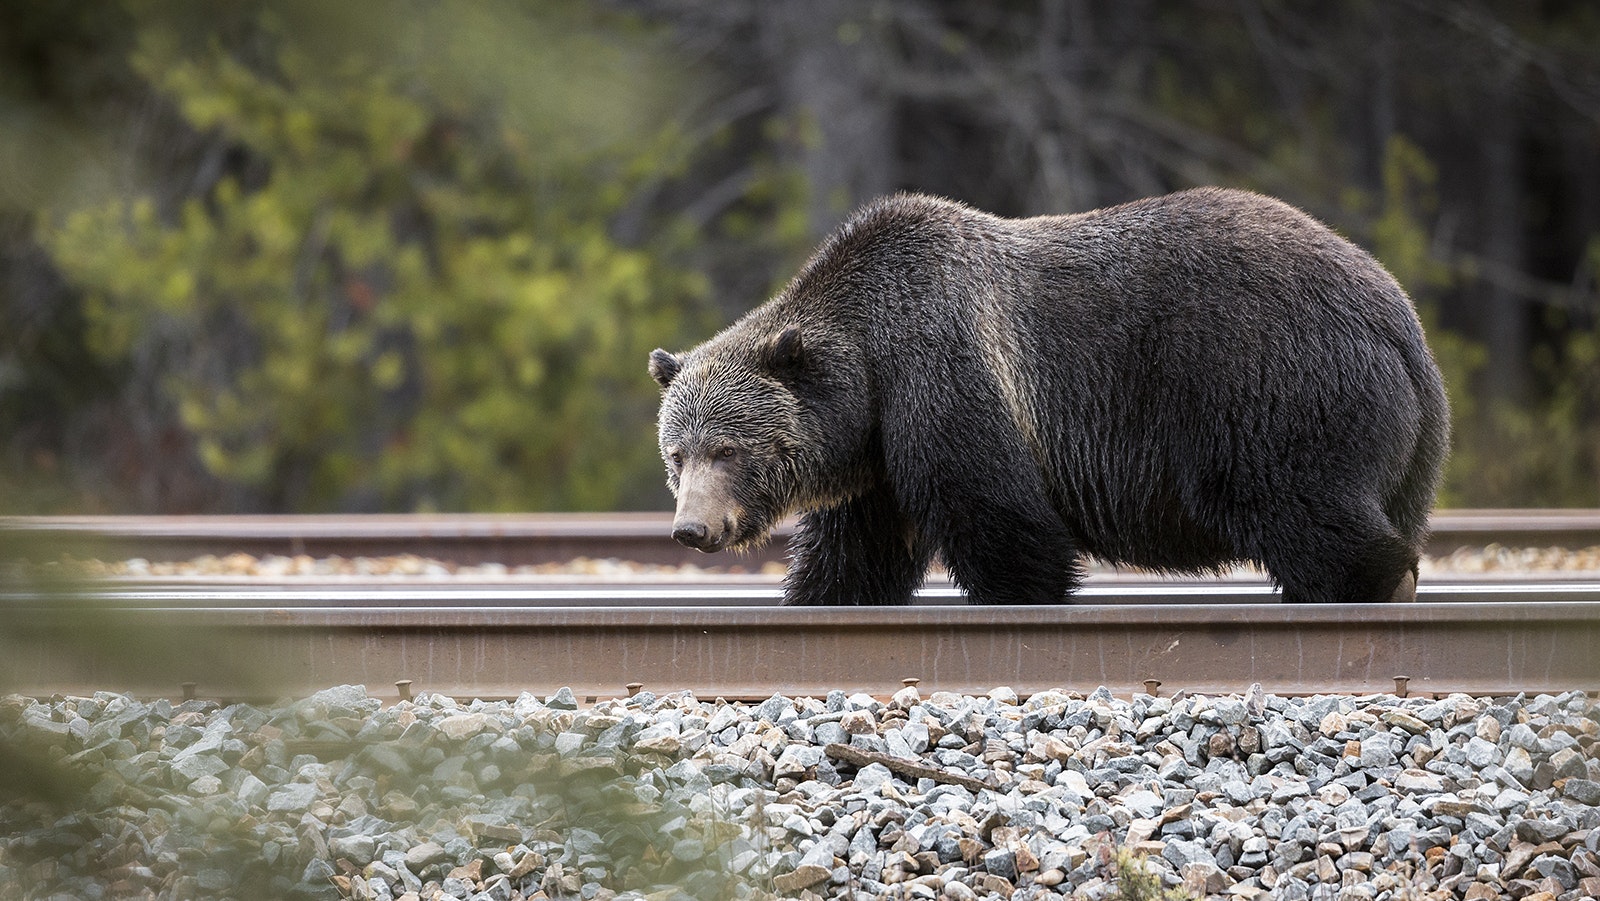 Grizzly bears getting hit by trains isn't a big problem in Wyoming, but is still a concern for wildlife officials.